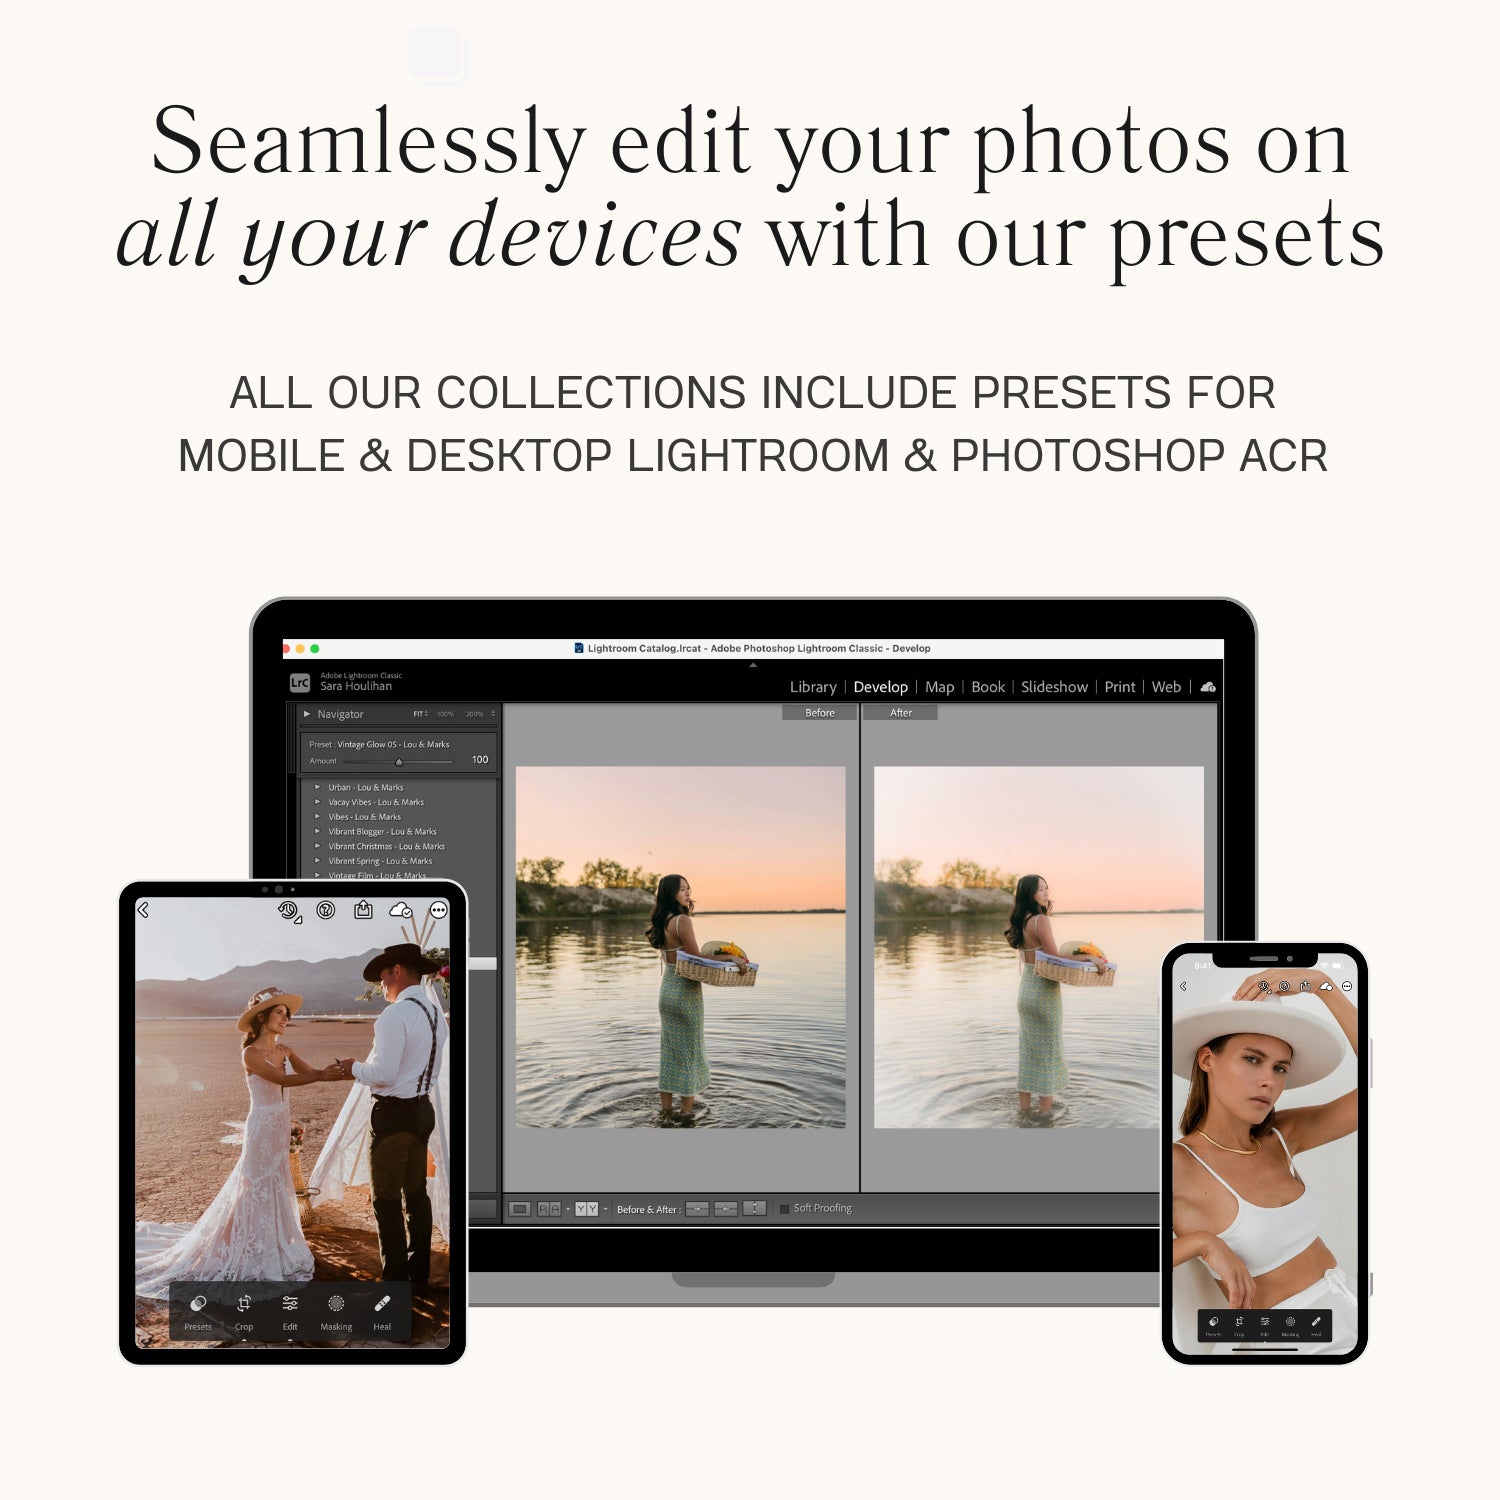 Adobe Cinematic Lightroom Presets The Best Film Photo Editing Preset Filters For An Analog Vintage Retro Film Look With Lightroom Mobile And Desktop For Photographers and Instagram Influencers By Lou And Marks Presets